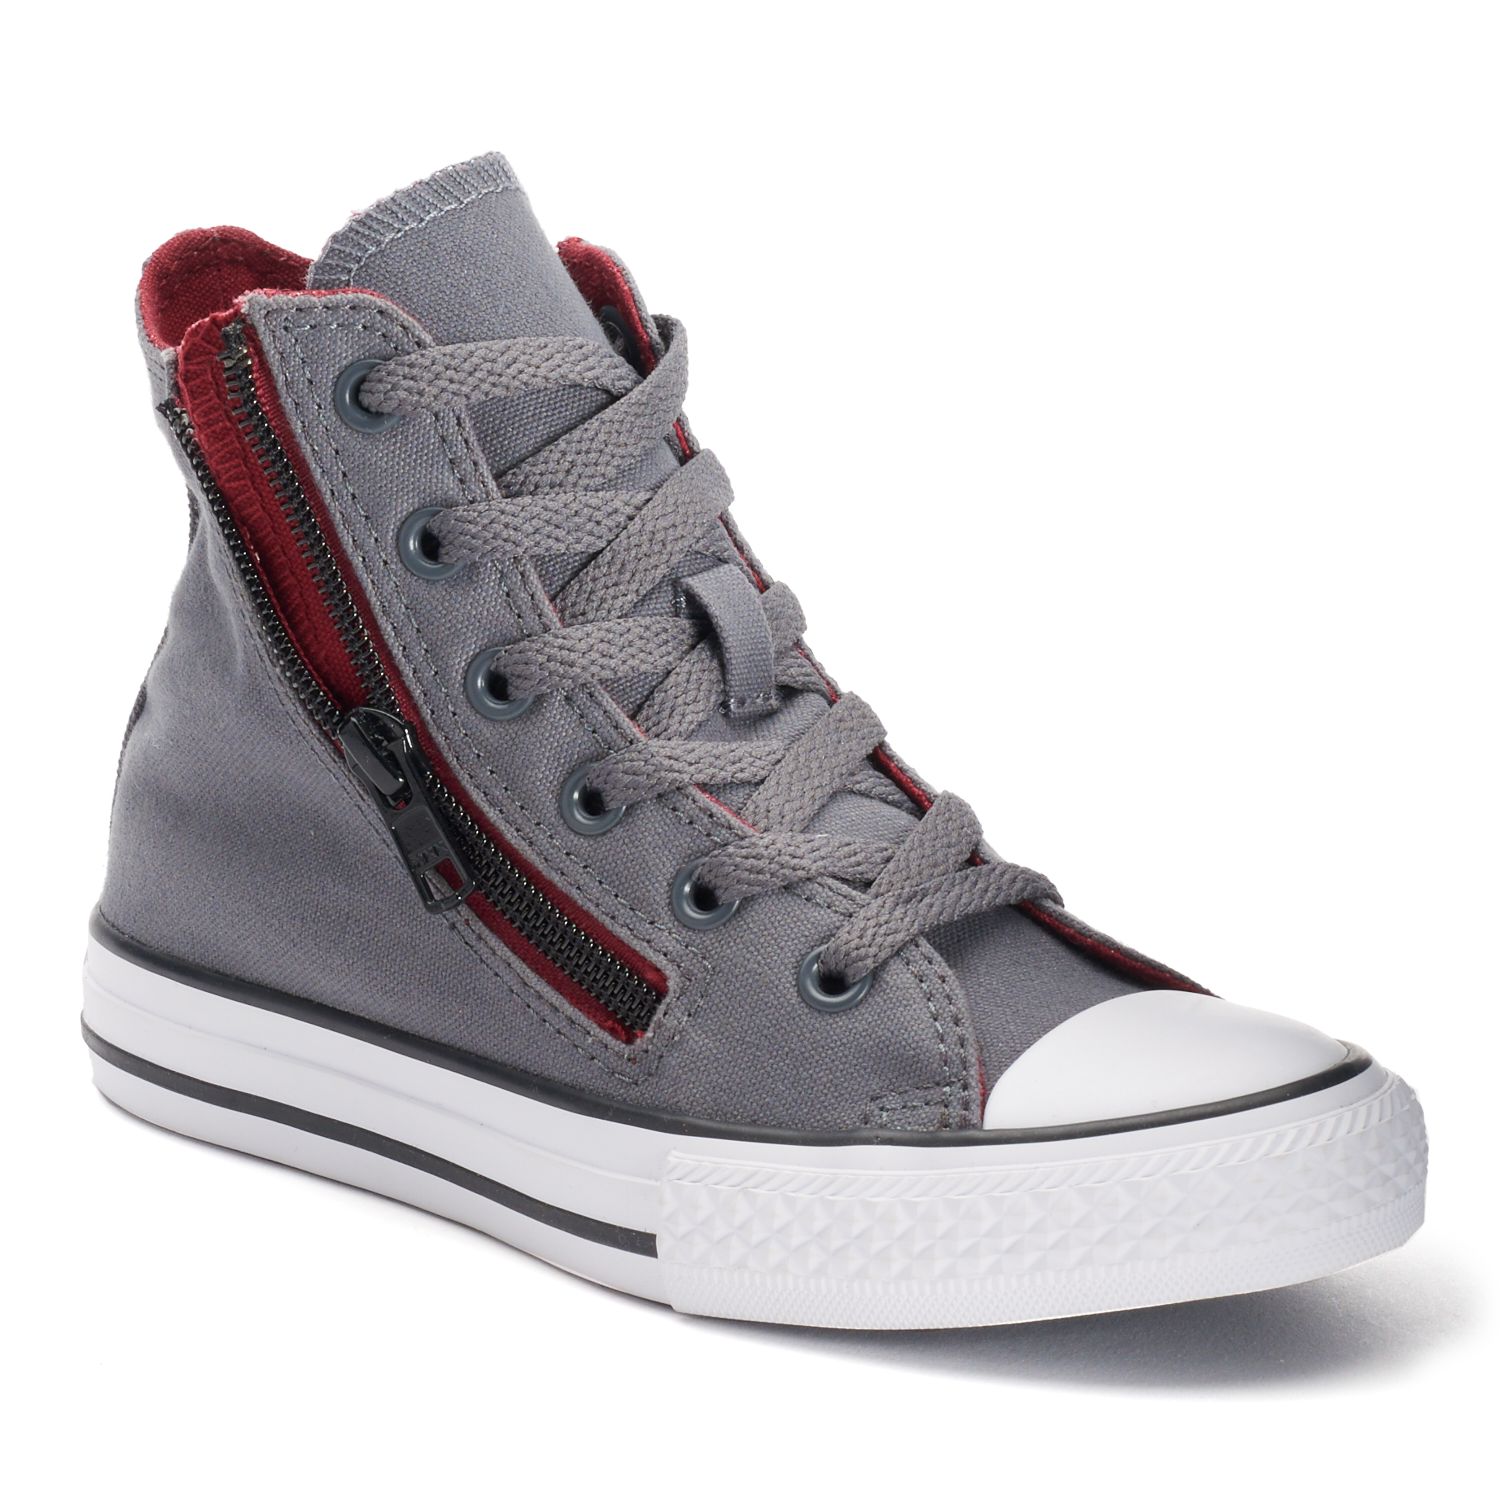 converse all star double zipper high top sneakers